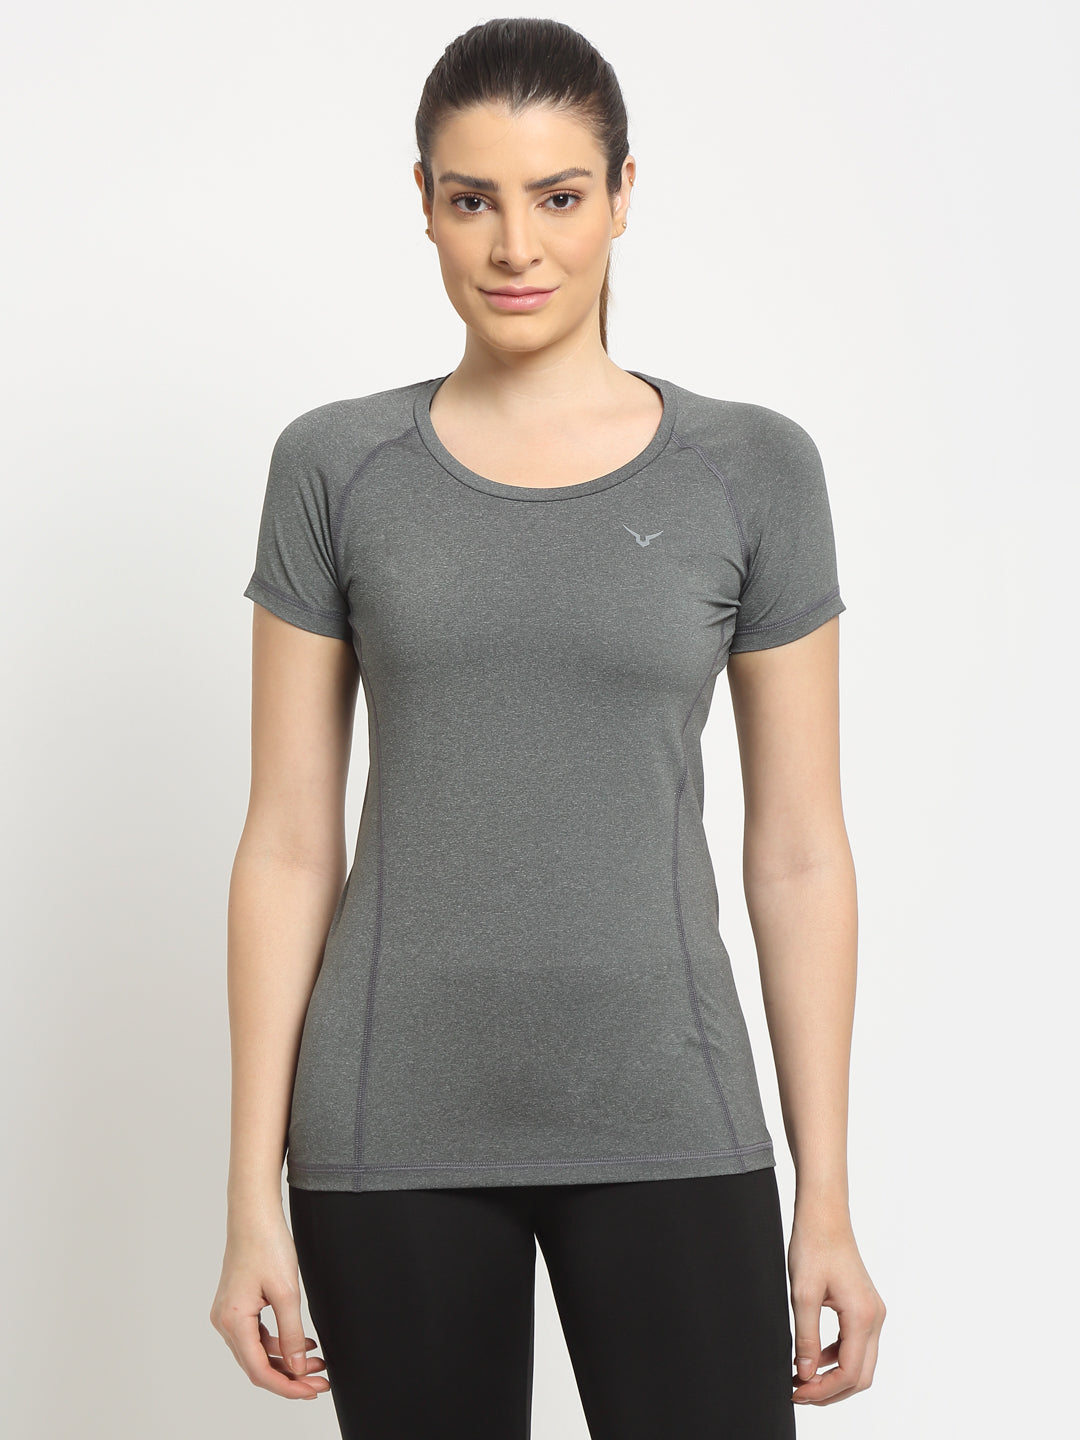 Invincible Women’s Stretch Round Neck Solid Tee